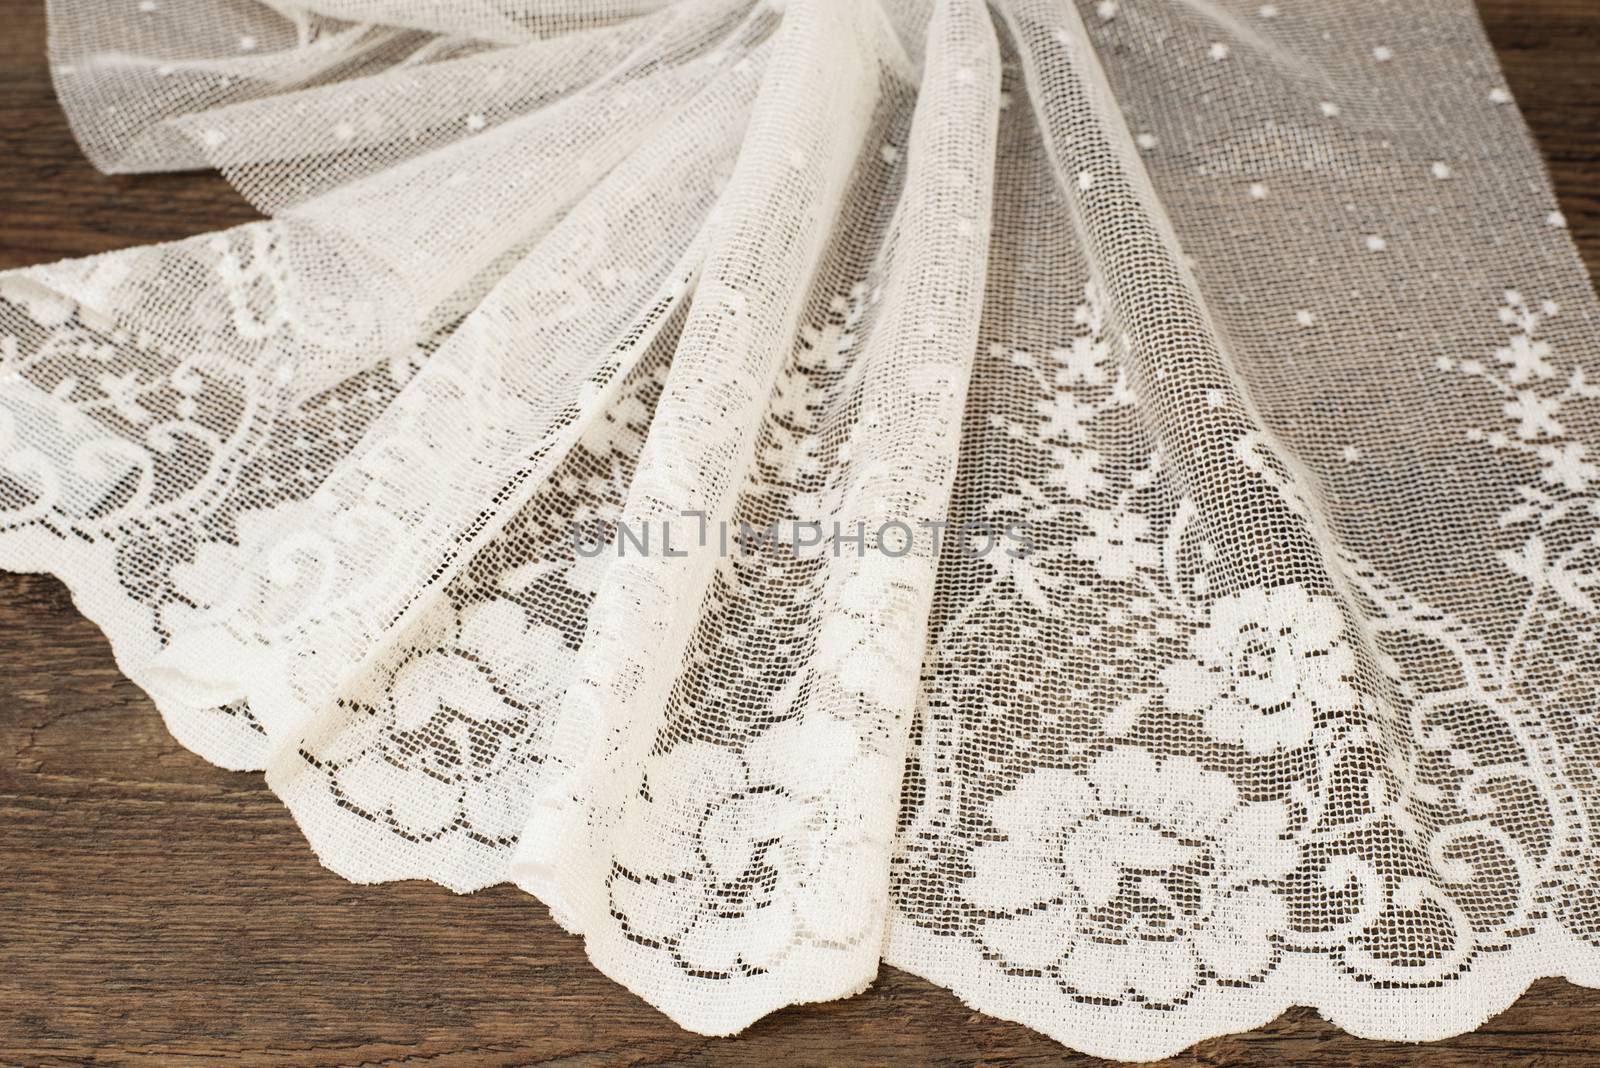 Close up of Beautiful White Tulle. Sheer Curtains Fabric Sample. Texture, Background, Pattern. Wedding Concept. Interior Design. Vintage Lace Tulle Chiffon by sevda_stancheva